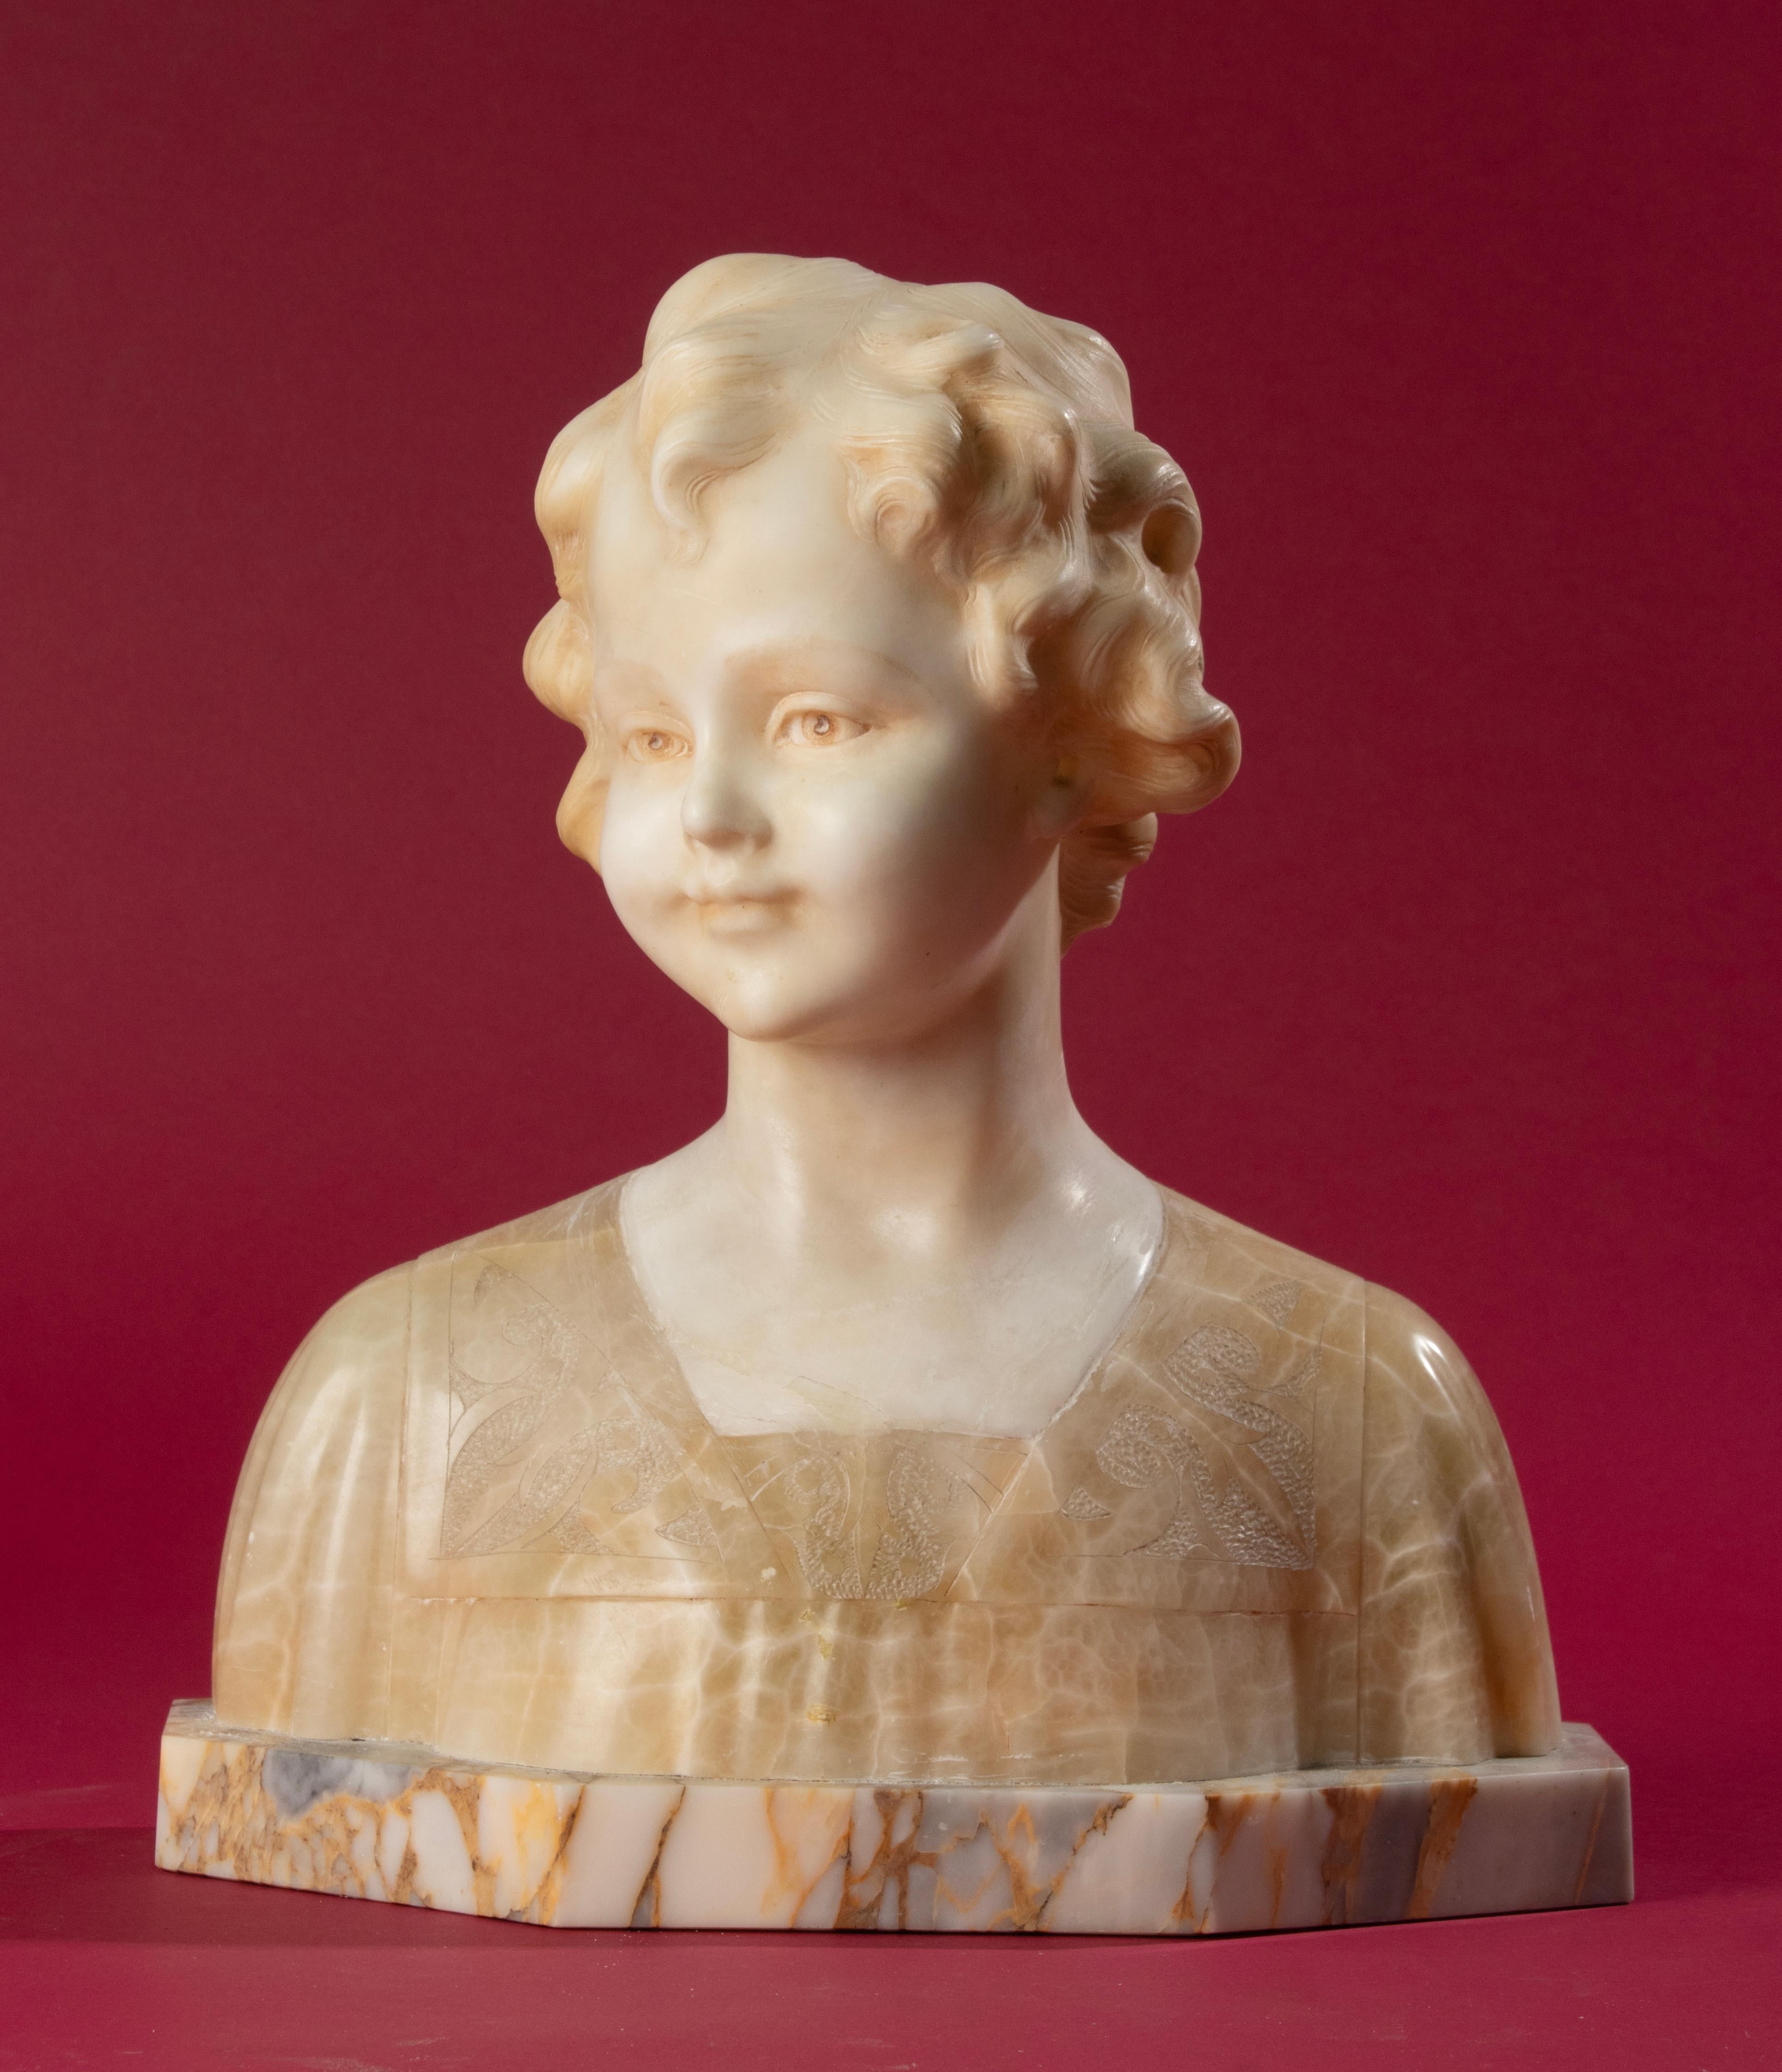 Multicolored alabaster statue of a young girl. Signed on the back: A. Trefoloni. (Italy, XIX-XX). The statue has a lovely appearance. The curly hair has a lot of detail, and contrasts nicely with the softness of the childish face. The clothing is of